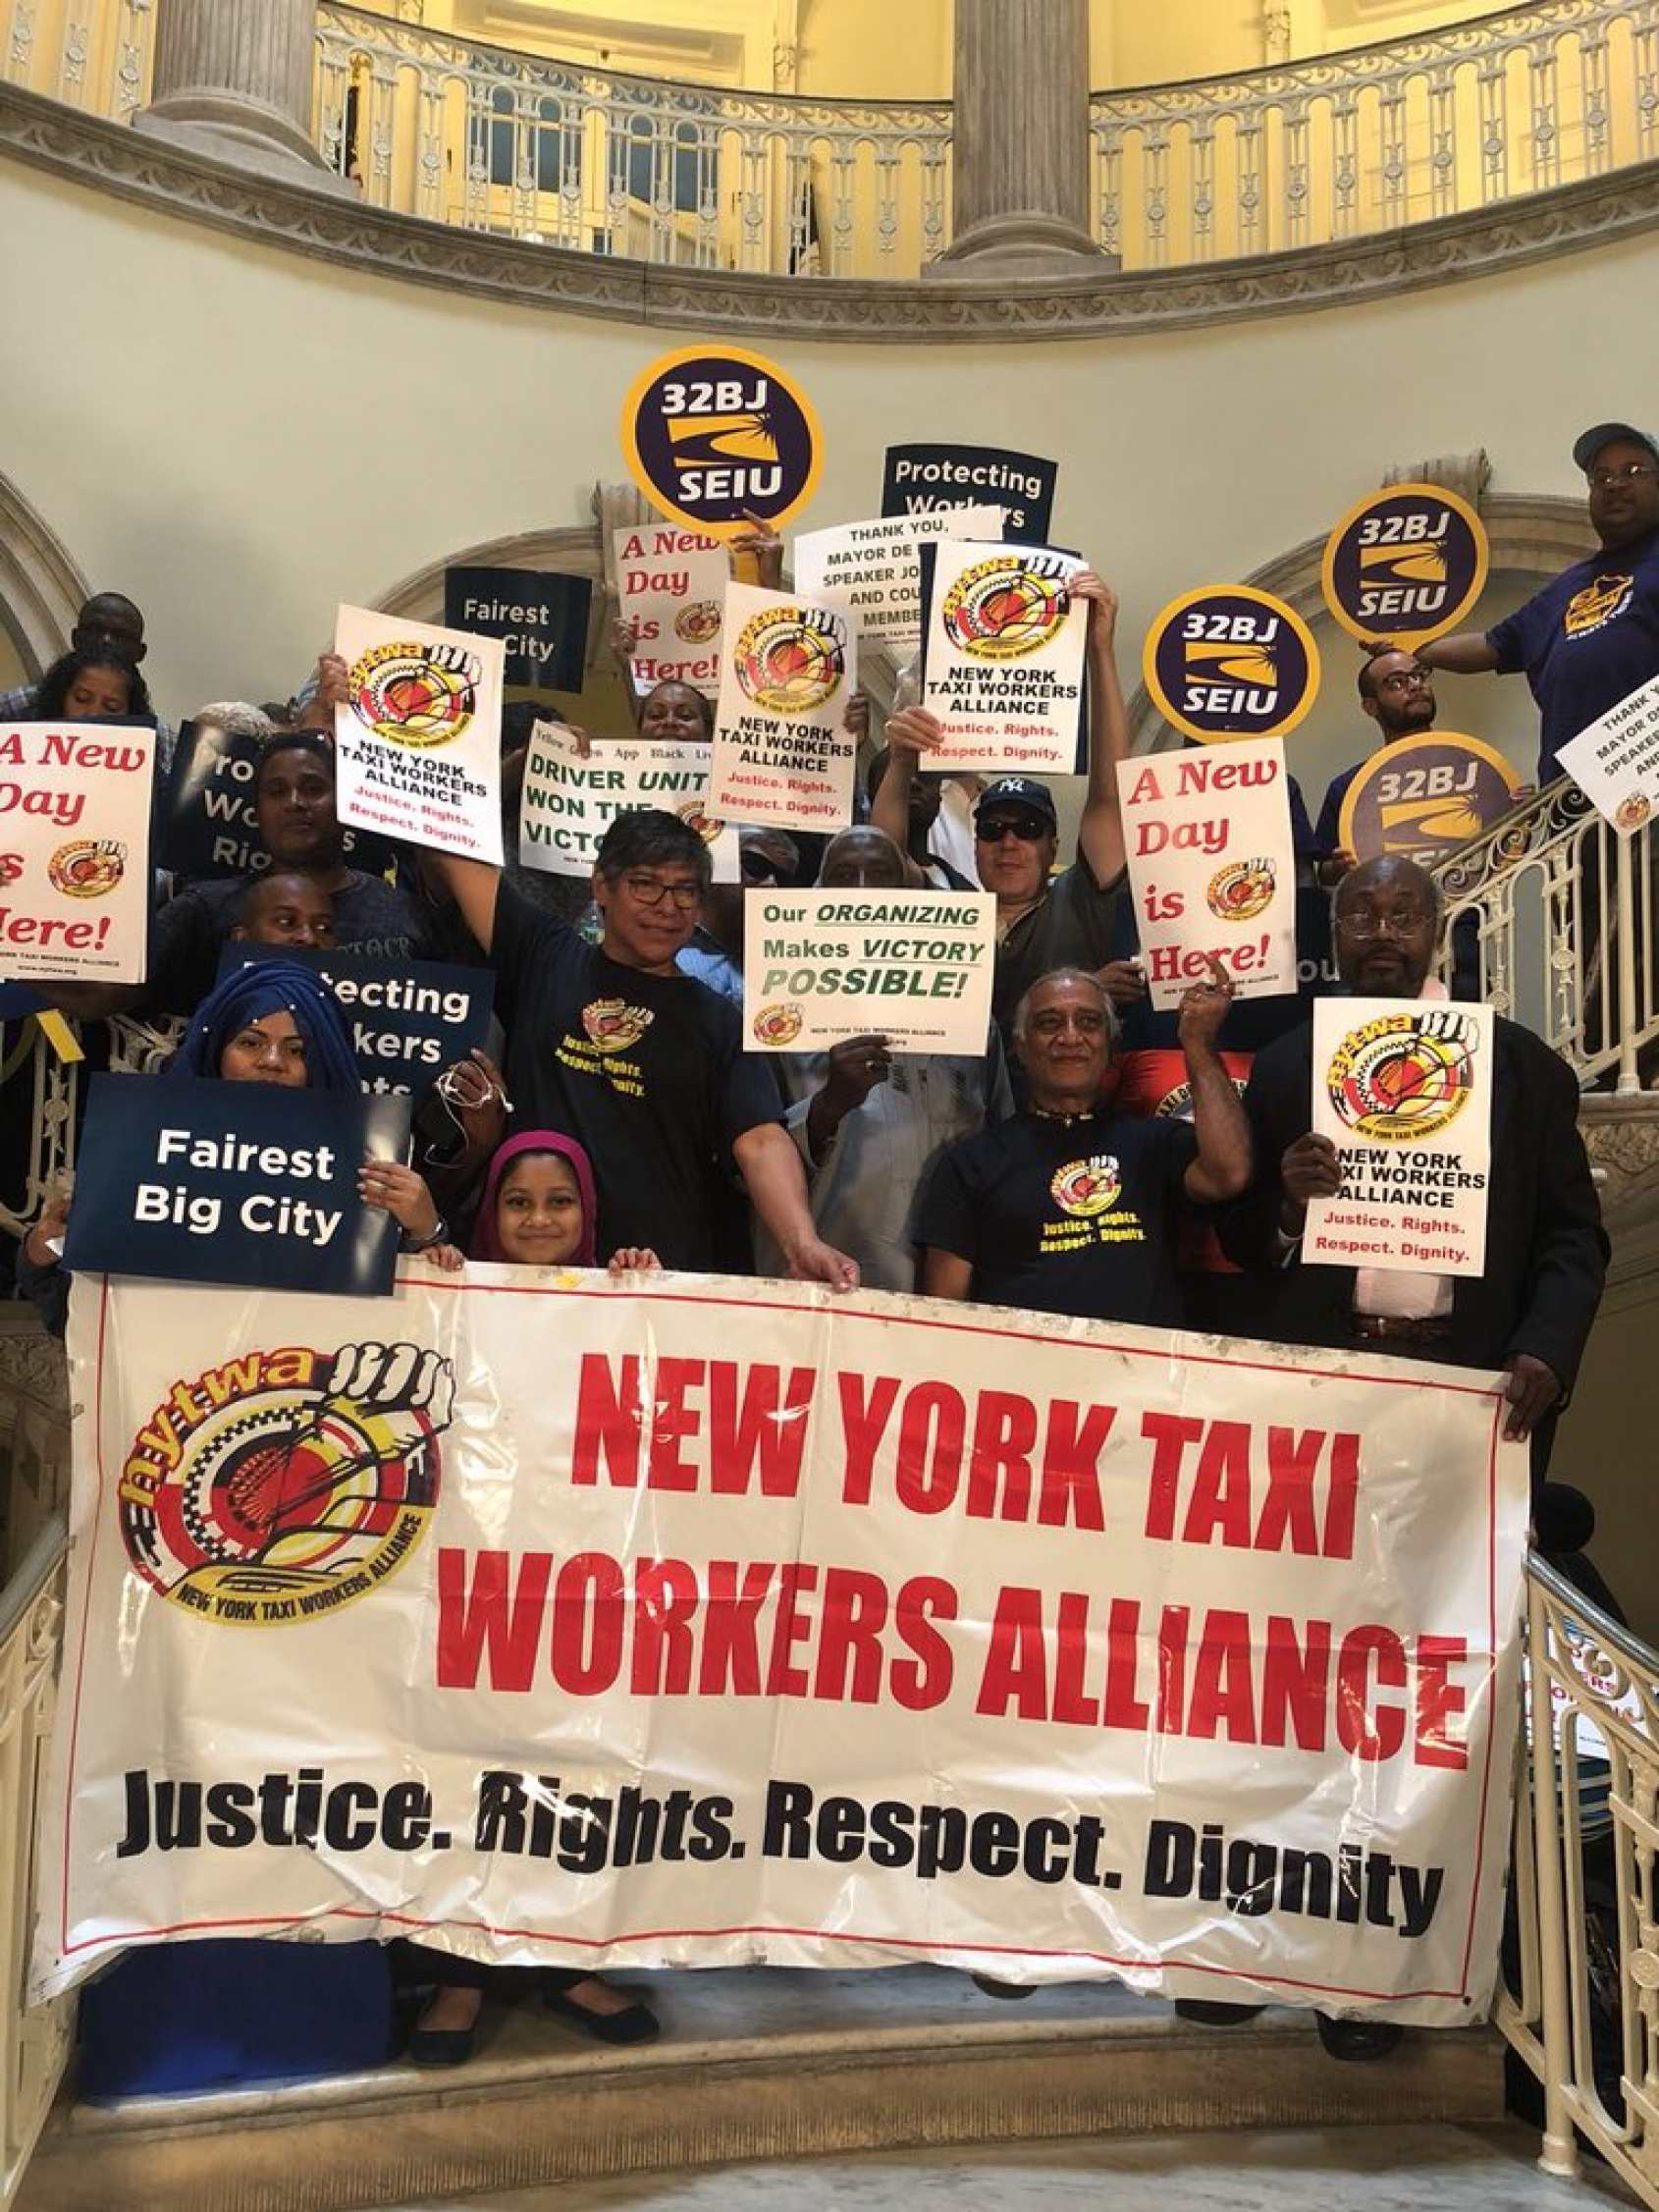 Workers from the New York Taxi Workers’ Alliance (NYTWA) built partnerships across the city